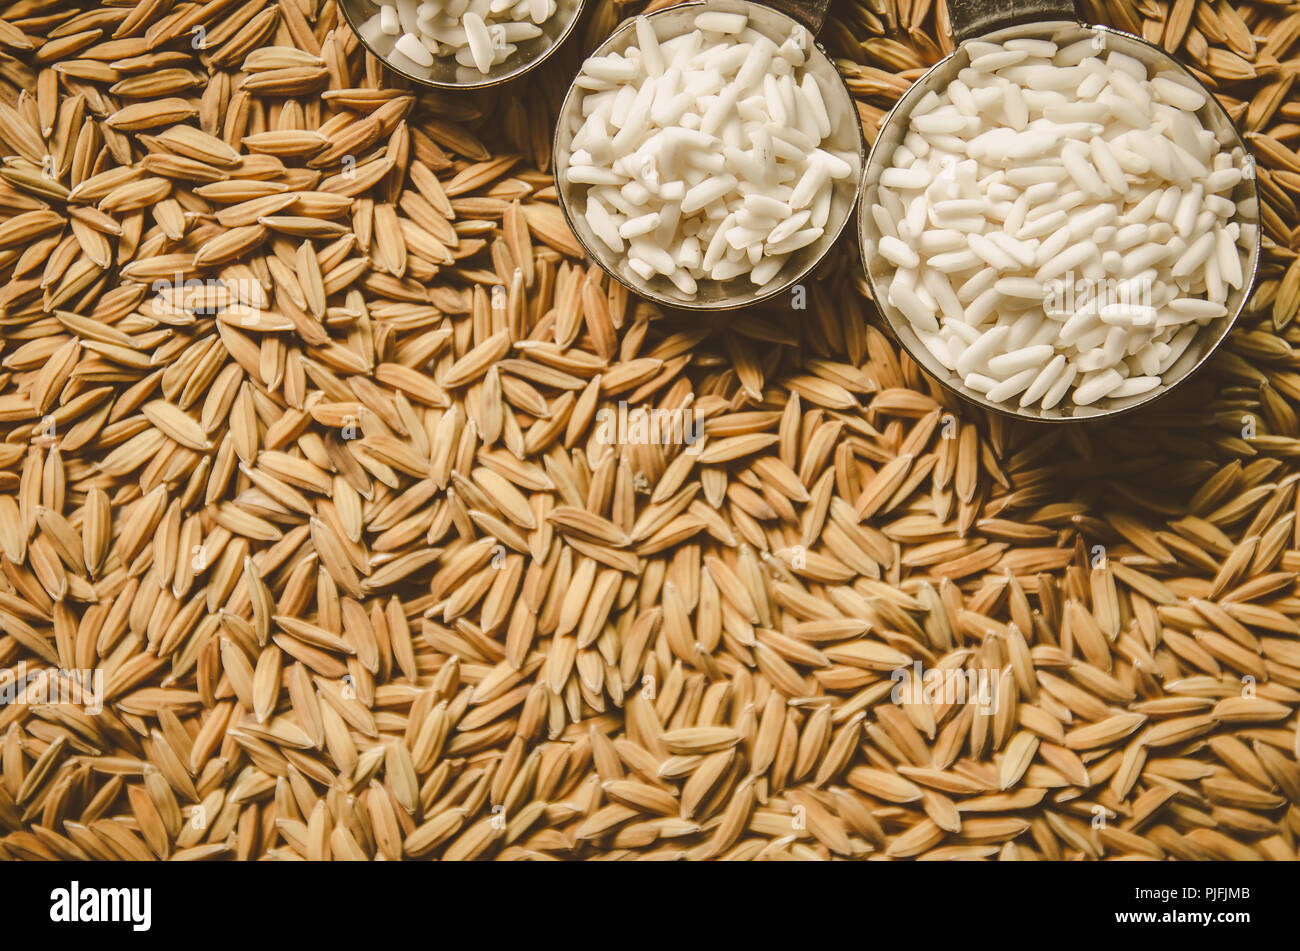 Unprocessed Rice Images Browse 2406 Stock Photos  Vectors Free Download  with Trial  Shutterstock